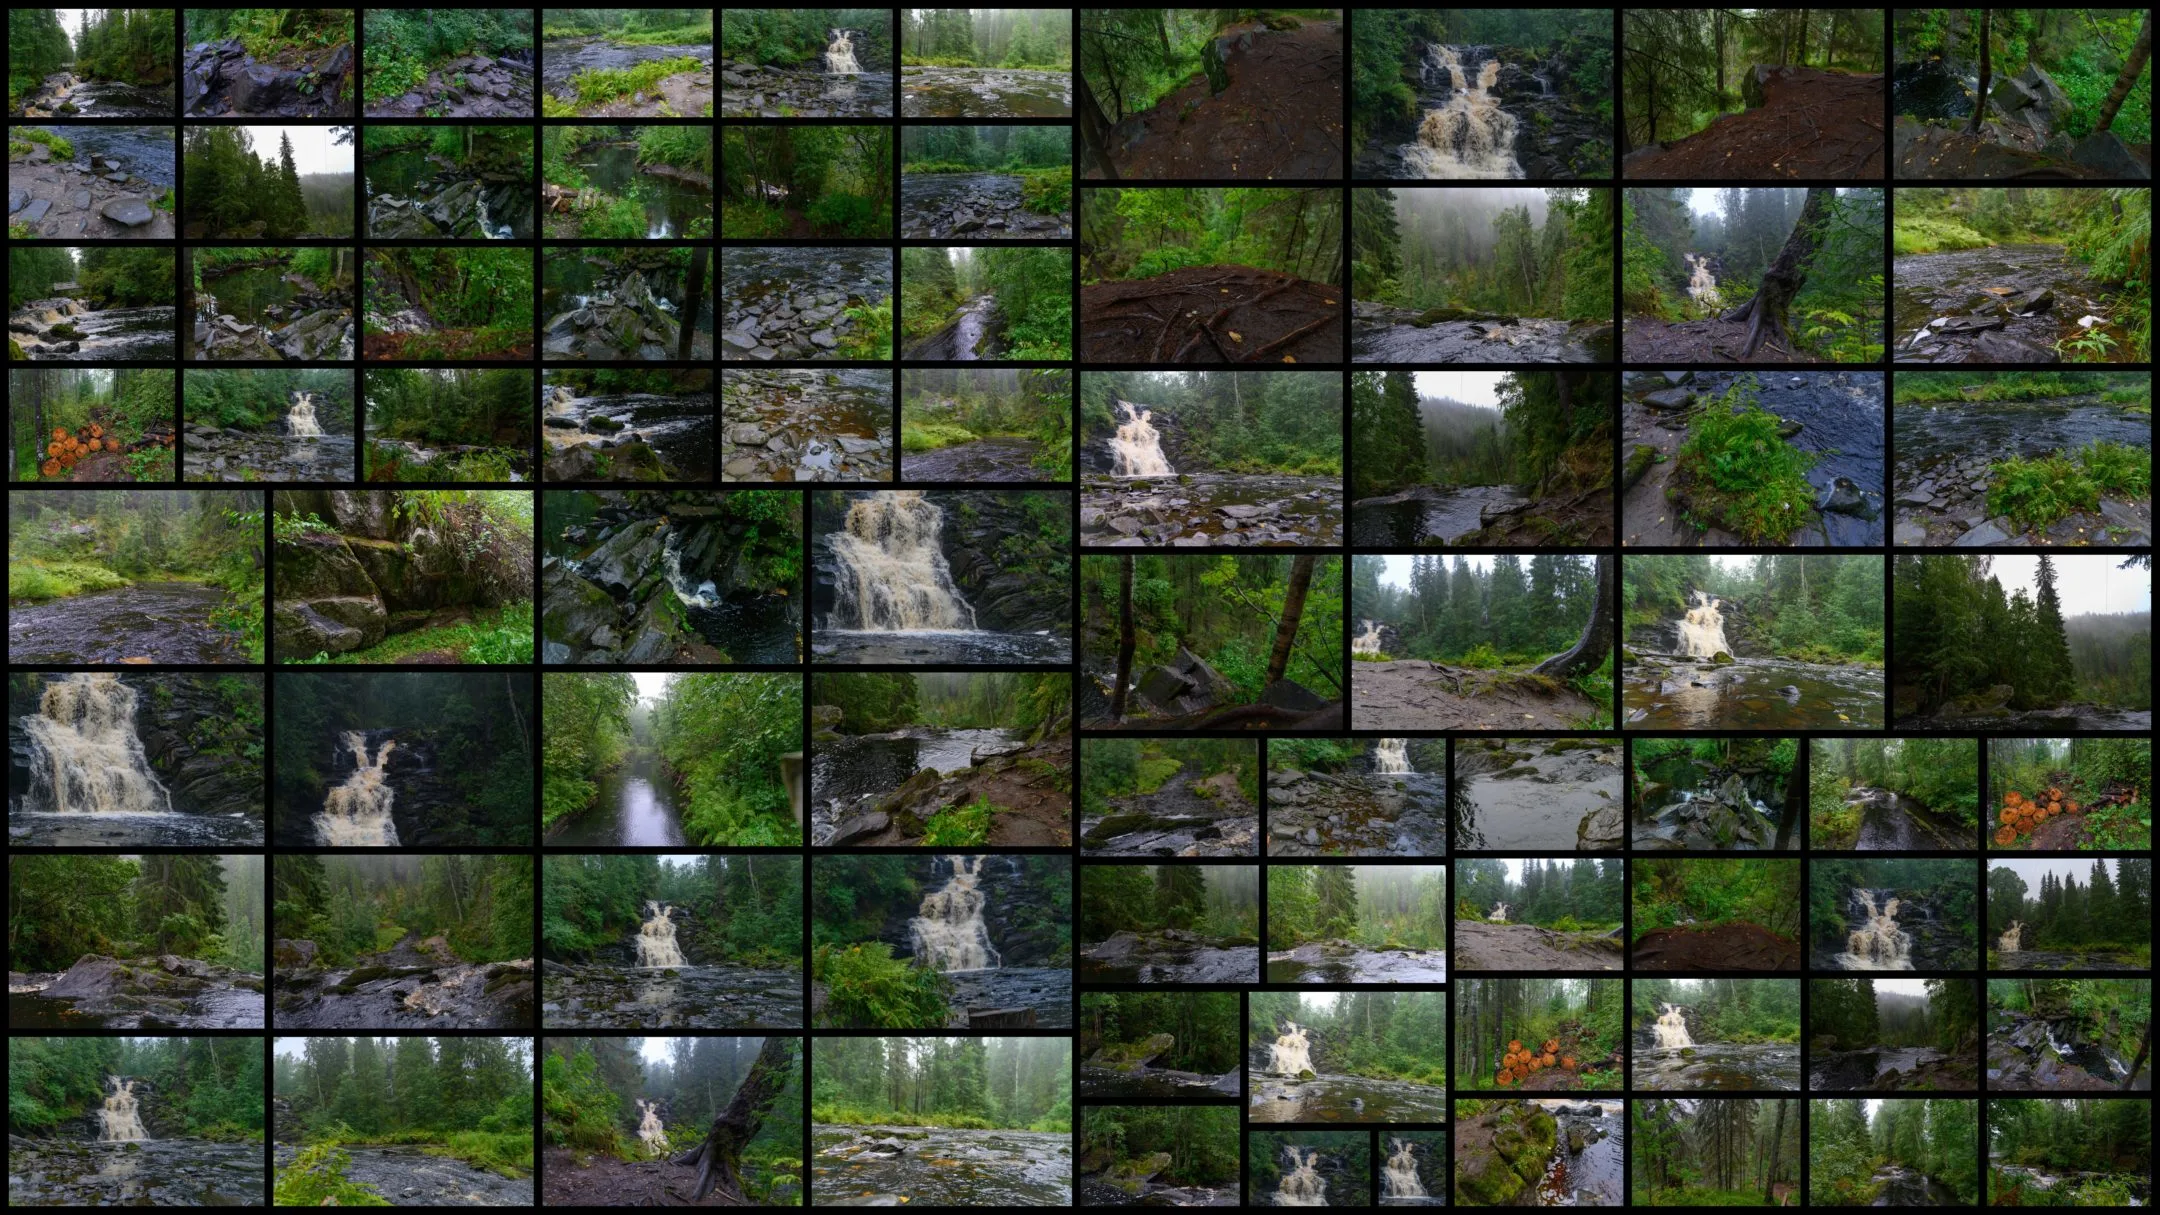 Northern Nature Plants Lake And Waterfall Reference Pictures